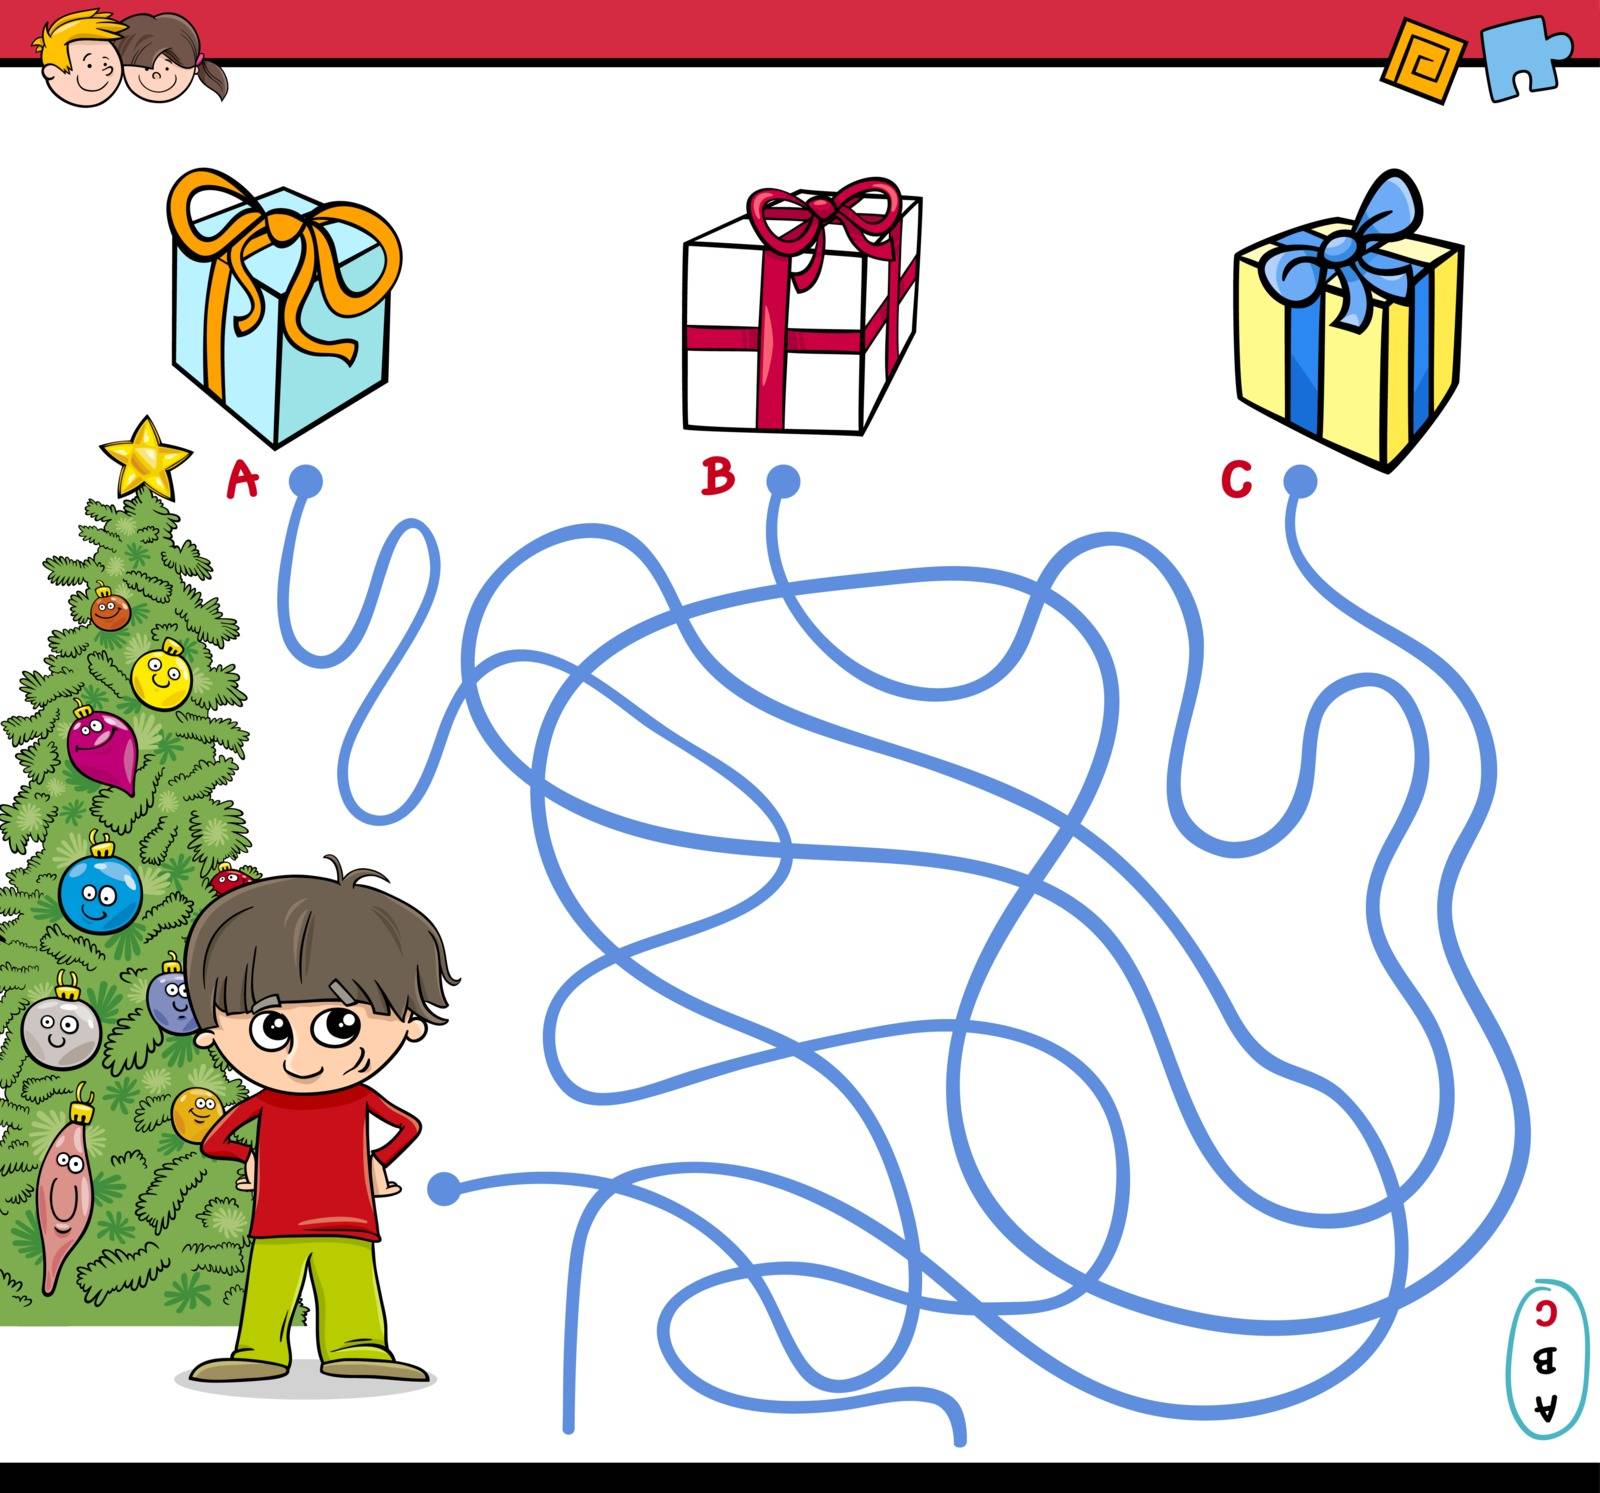 Cartoon Illustration of Educational Paths or Maze Puzzle Activity with Kid Boy and Christmas Presents